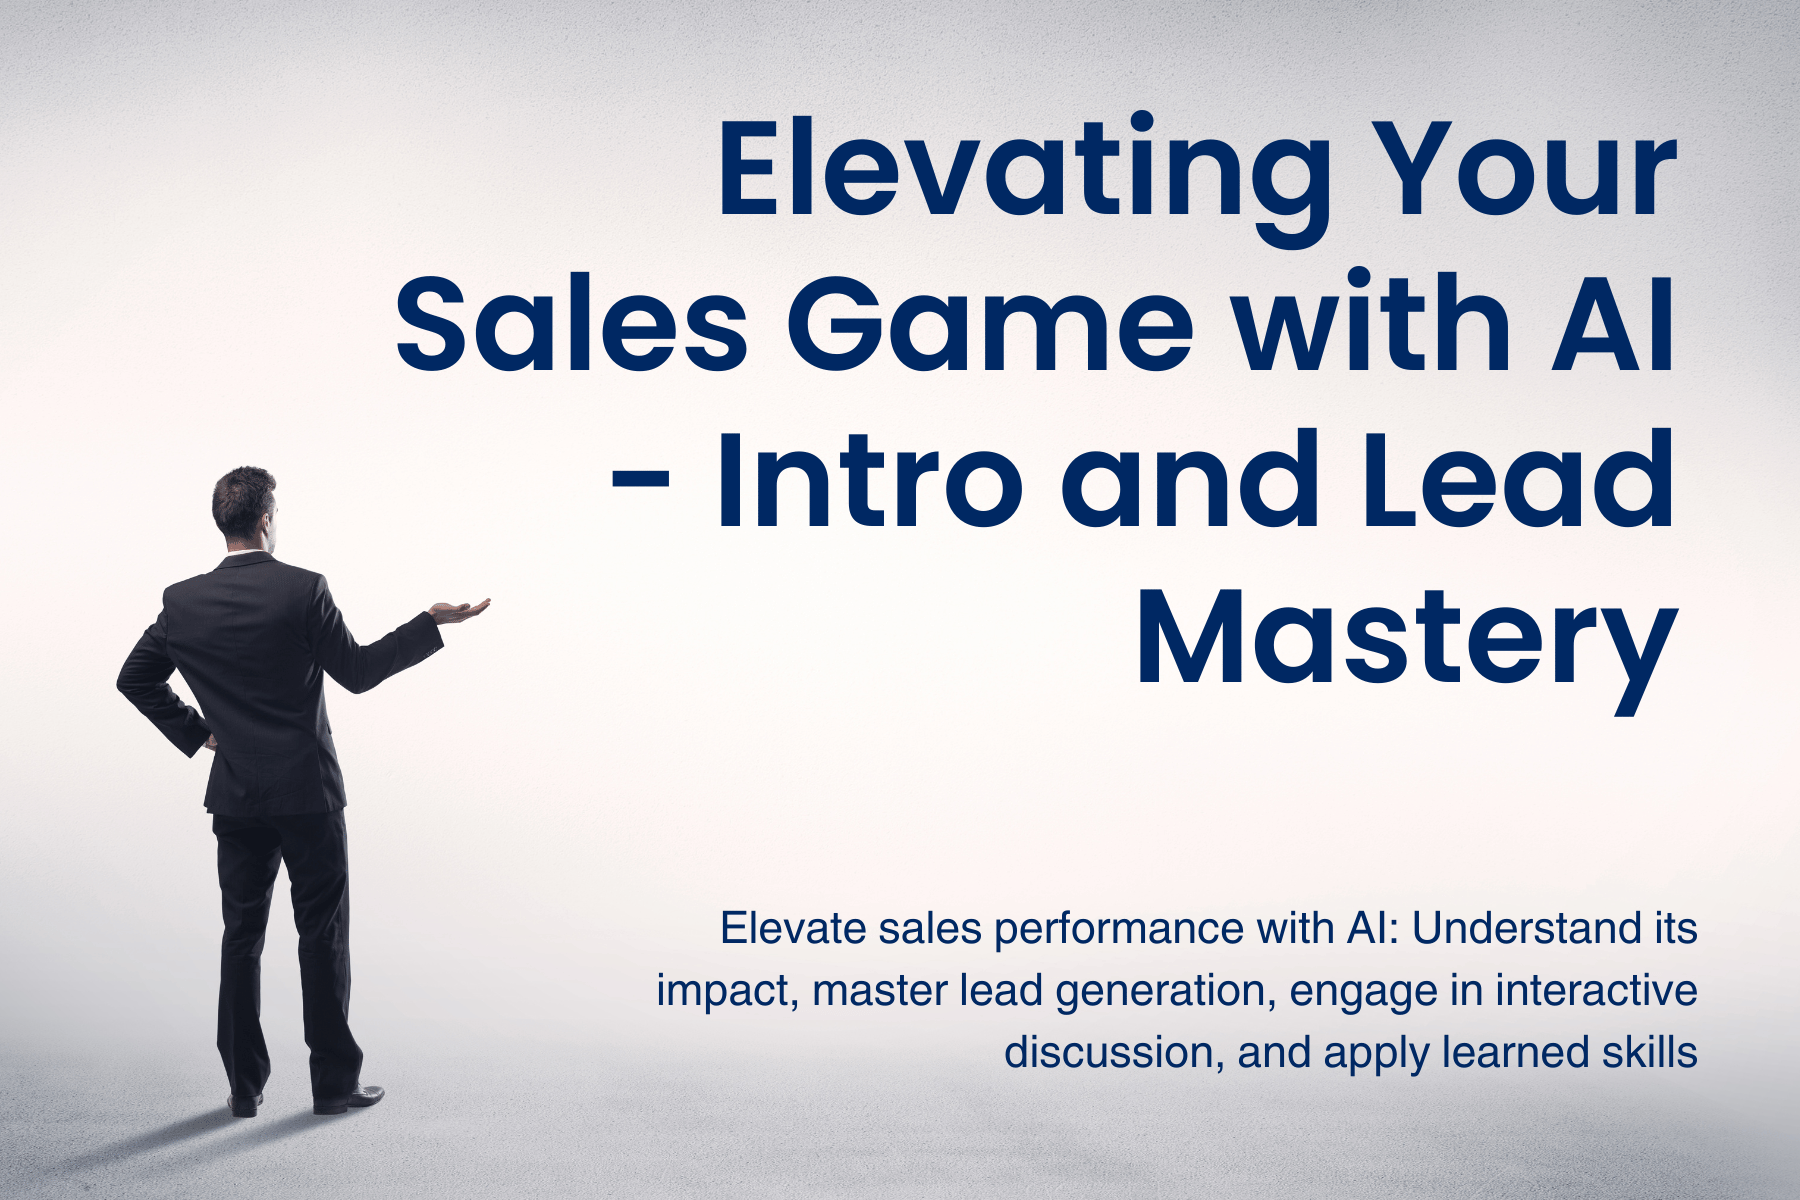 Introduction to Elevating Your Sales Game with AI – Intro and Lead Mastery